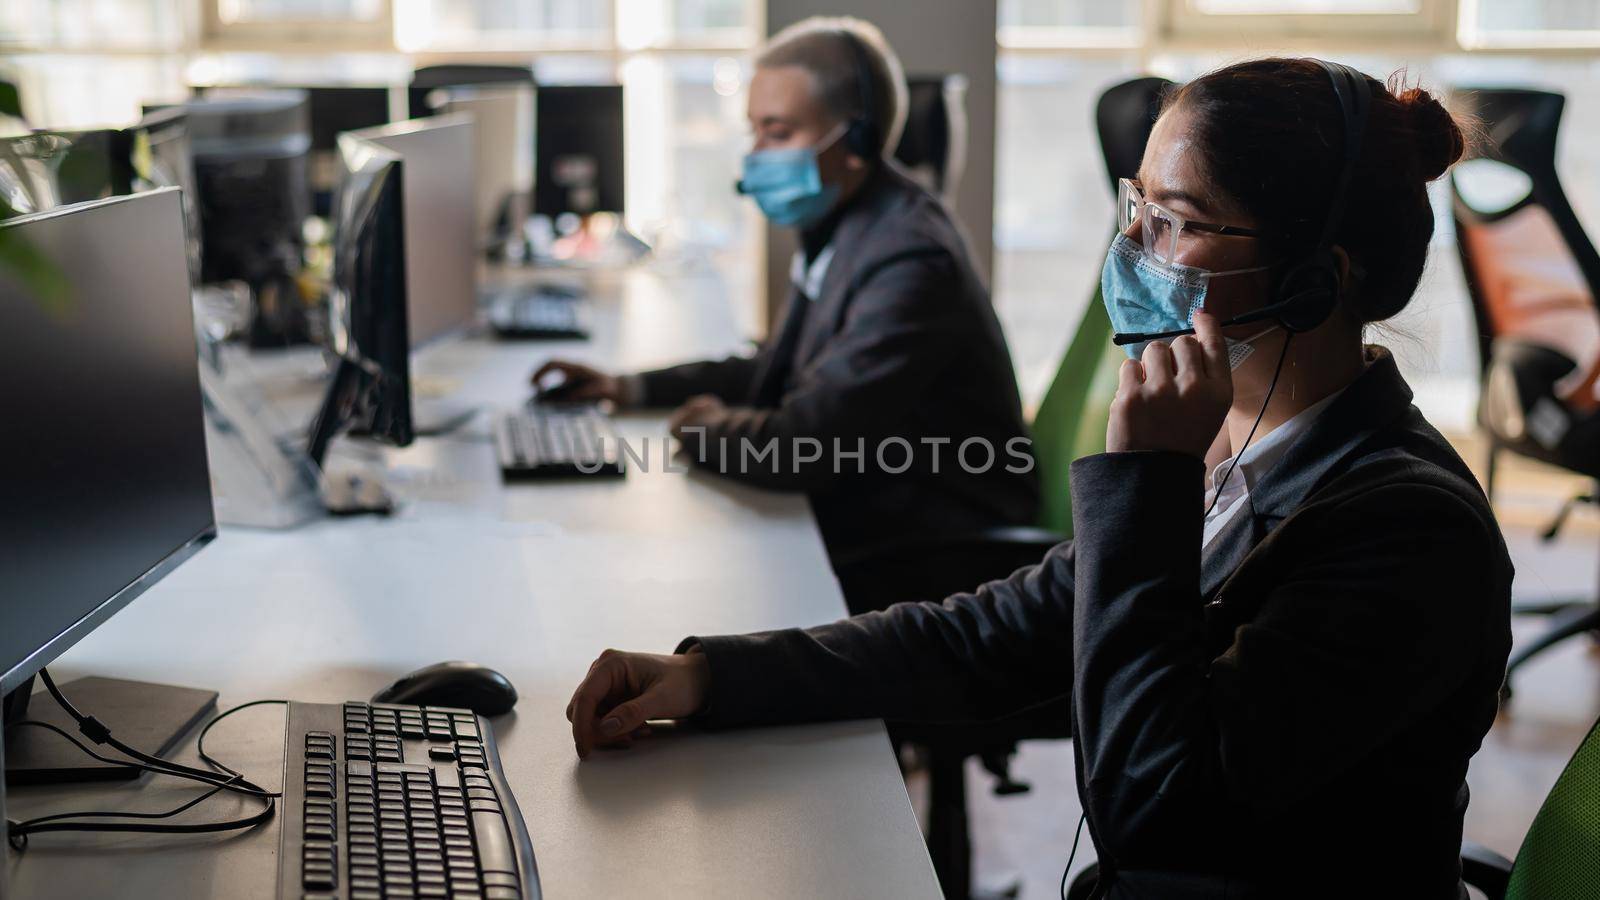 Two women in medical masks and headsets are working in the office.